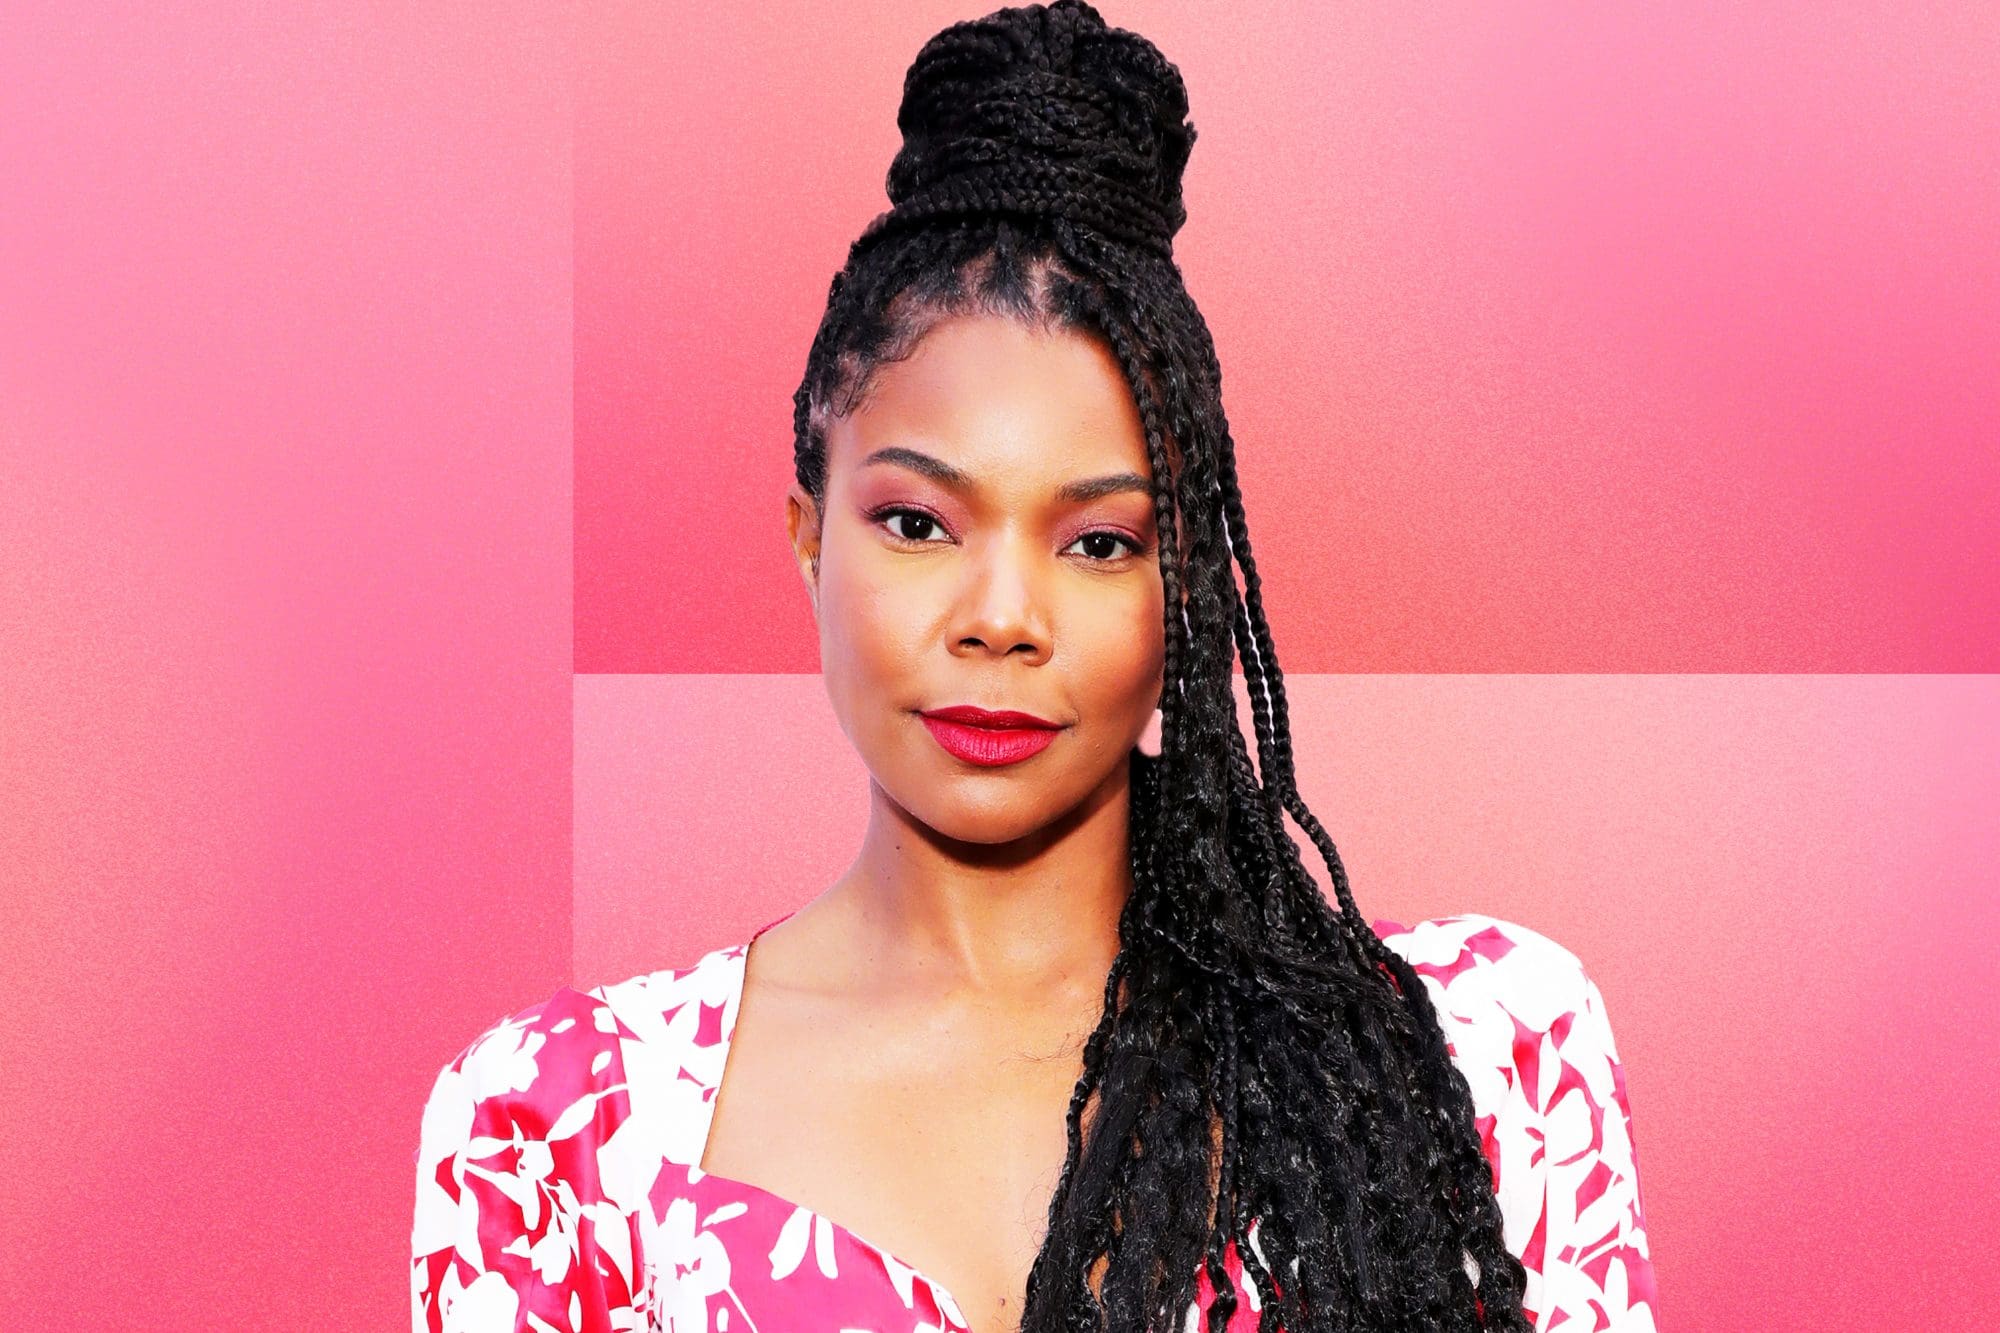 gabrielle-union-is-praising-another-important-lady-see-her-message